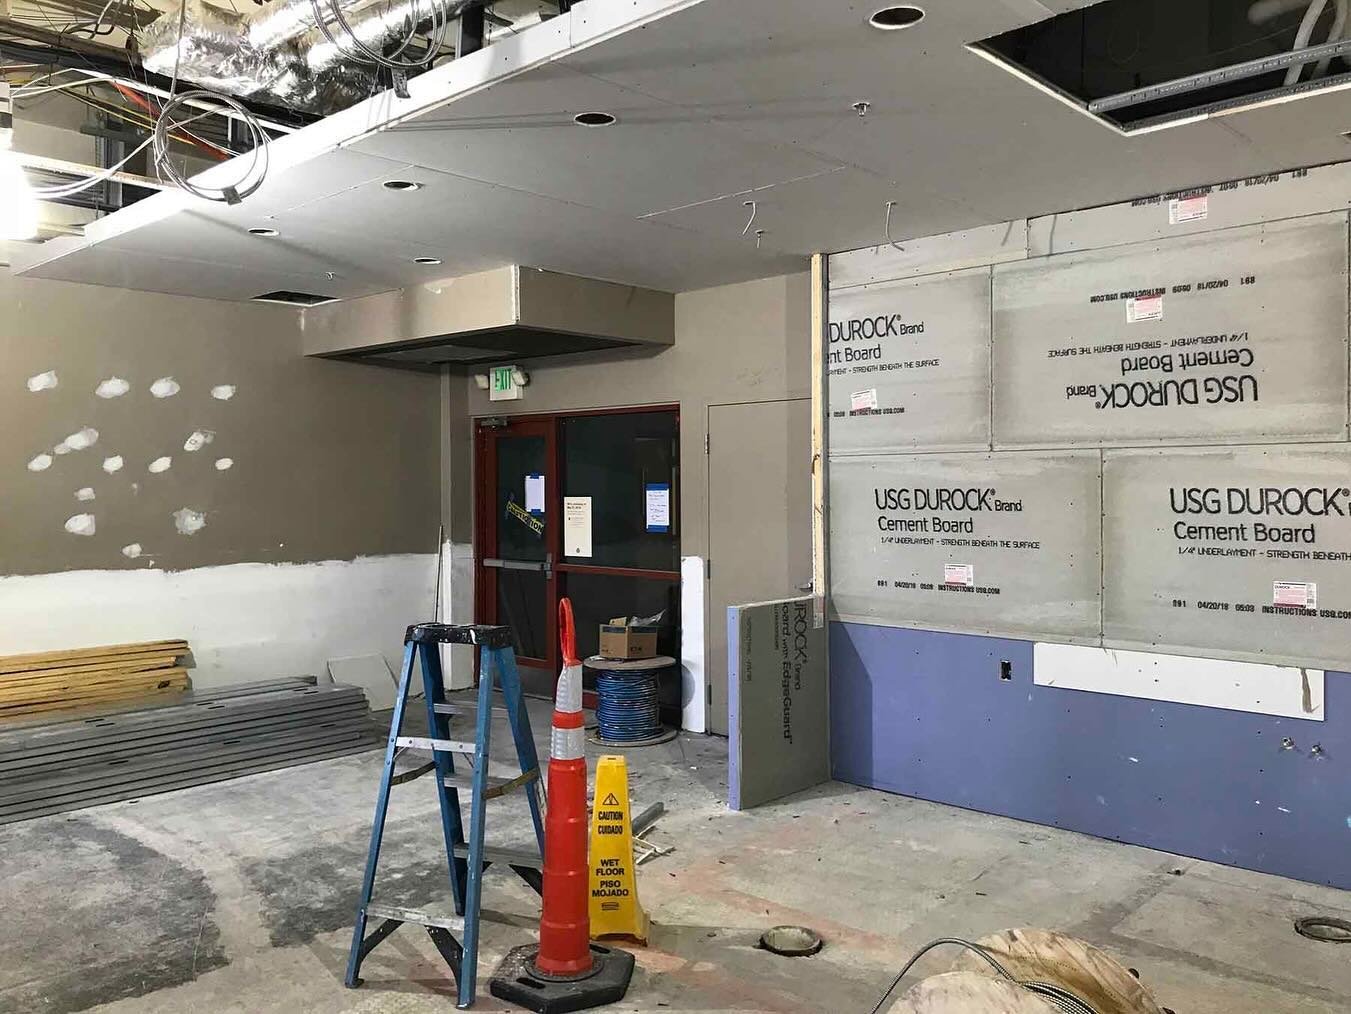 #17of40: Coletta partnered up with Vision 3 Architects to retrofit a new Starbucks store for Johnson &amp; Wales Univ. in downtown Providence. Beautiful details include chalk-board painted walls, tiled walls &amp; flooring, cable handrails, custom se